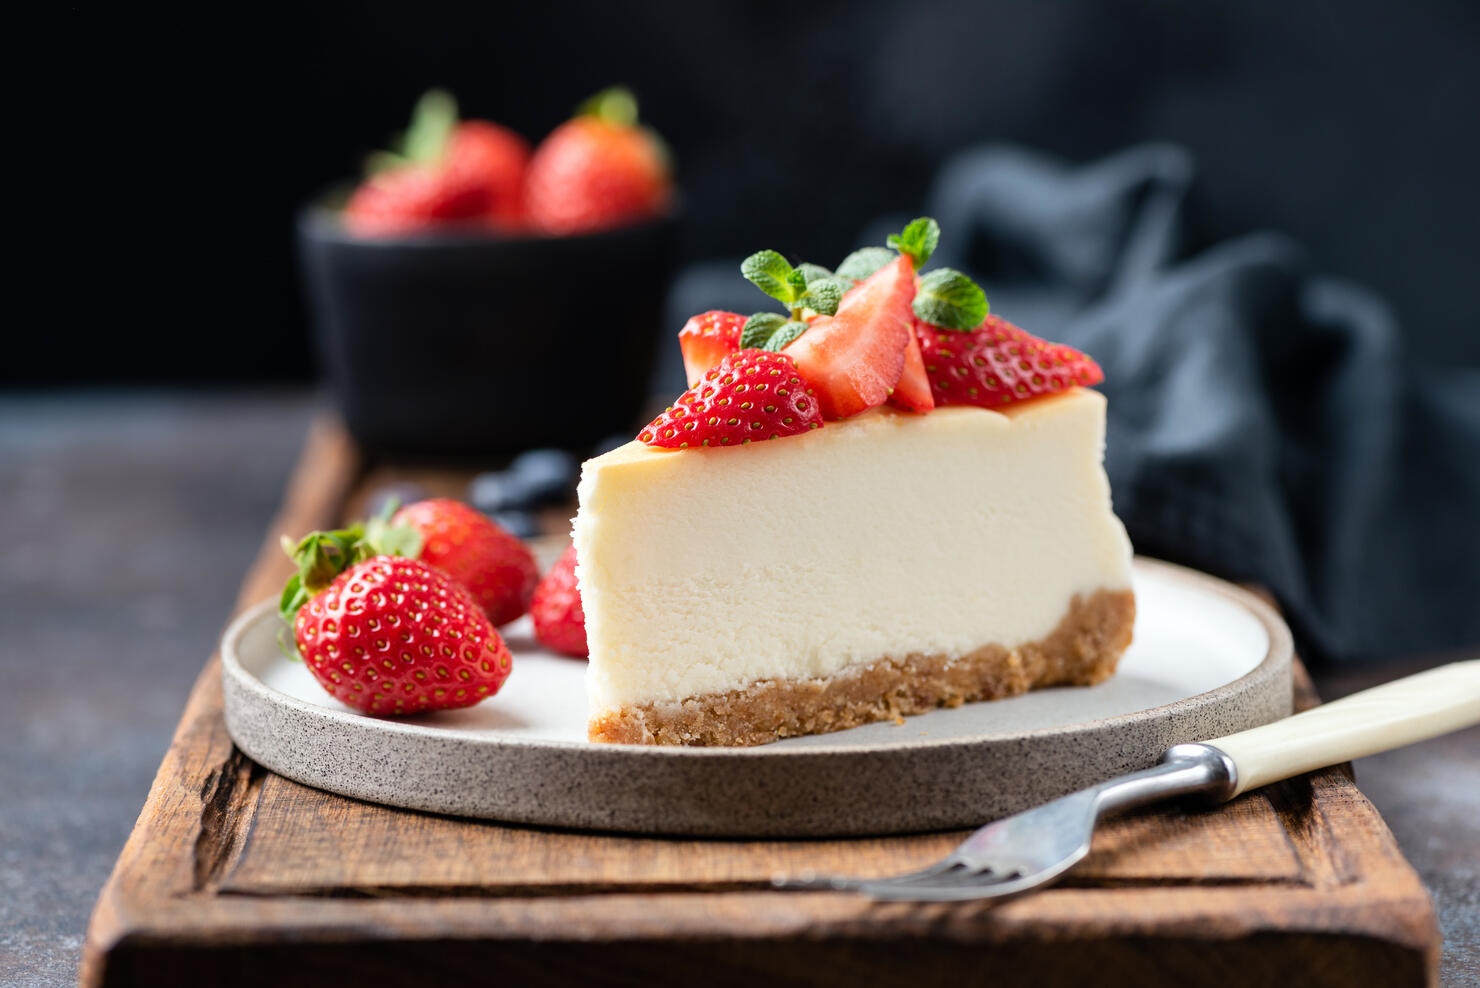 This Restaurant Serves The Best Cheesecake In Georgia | iHeart